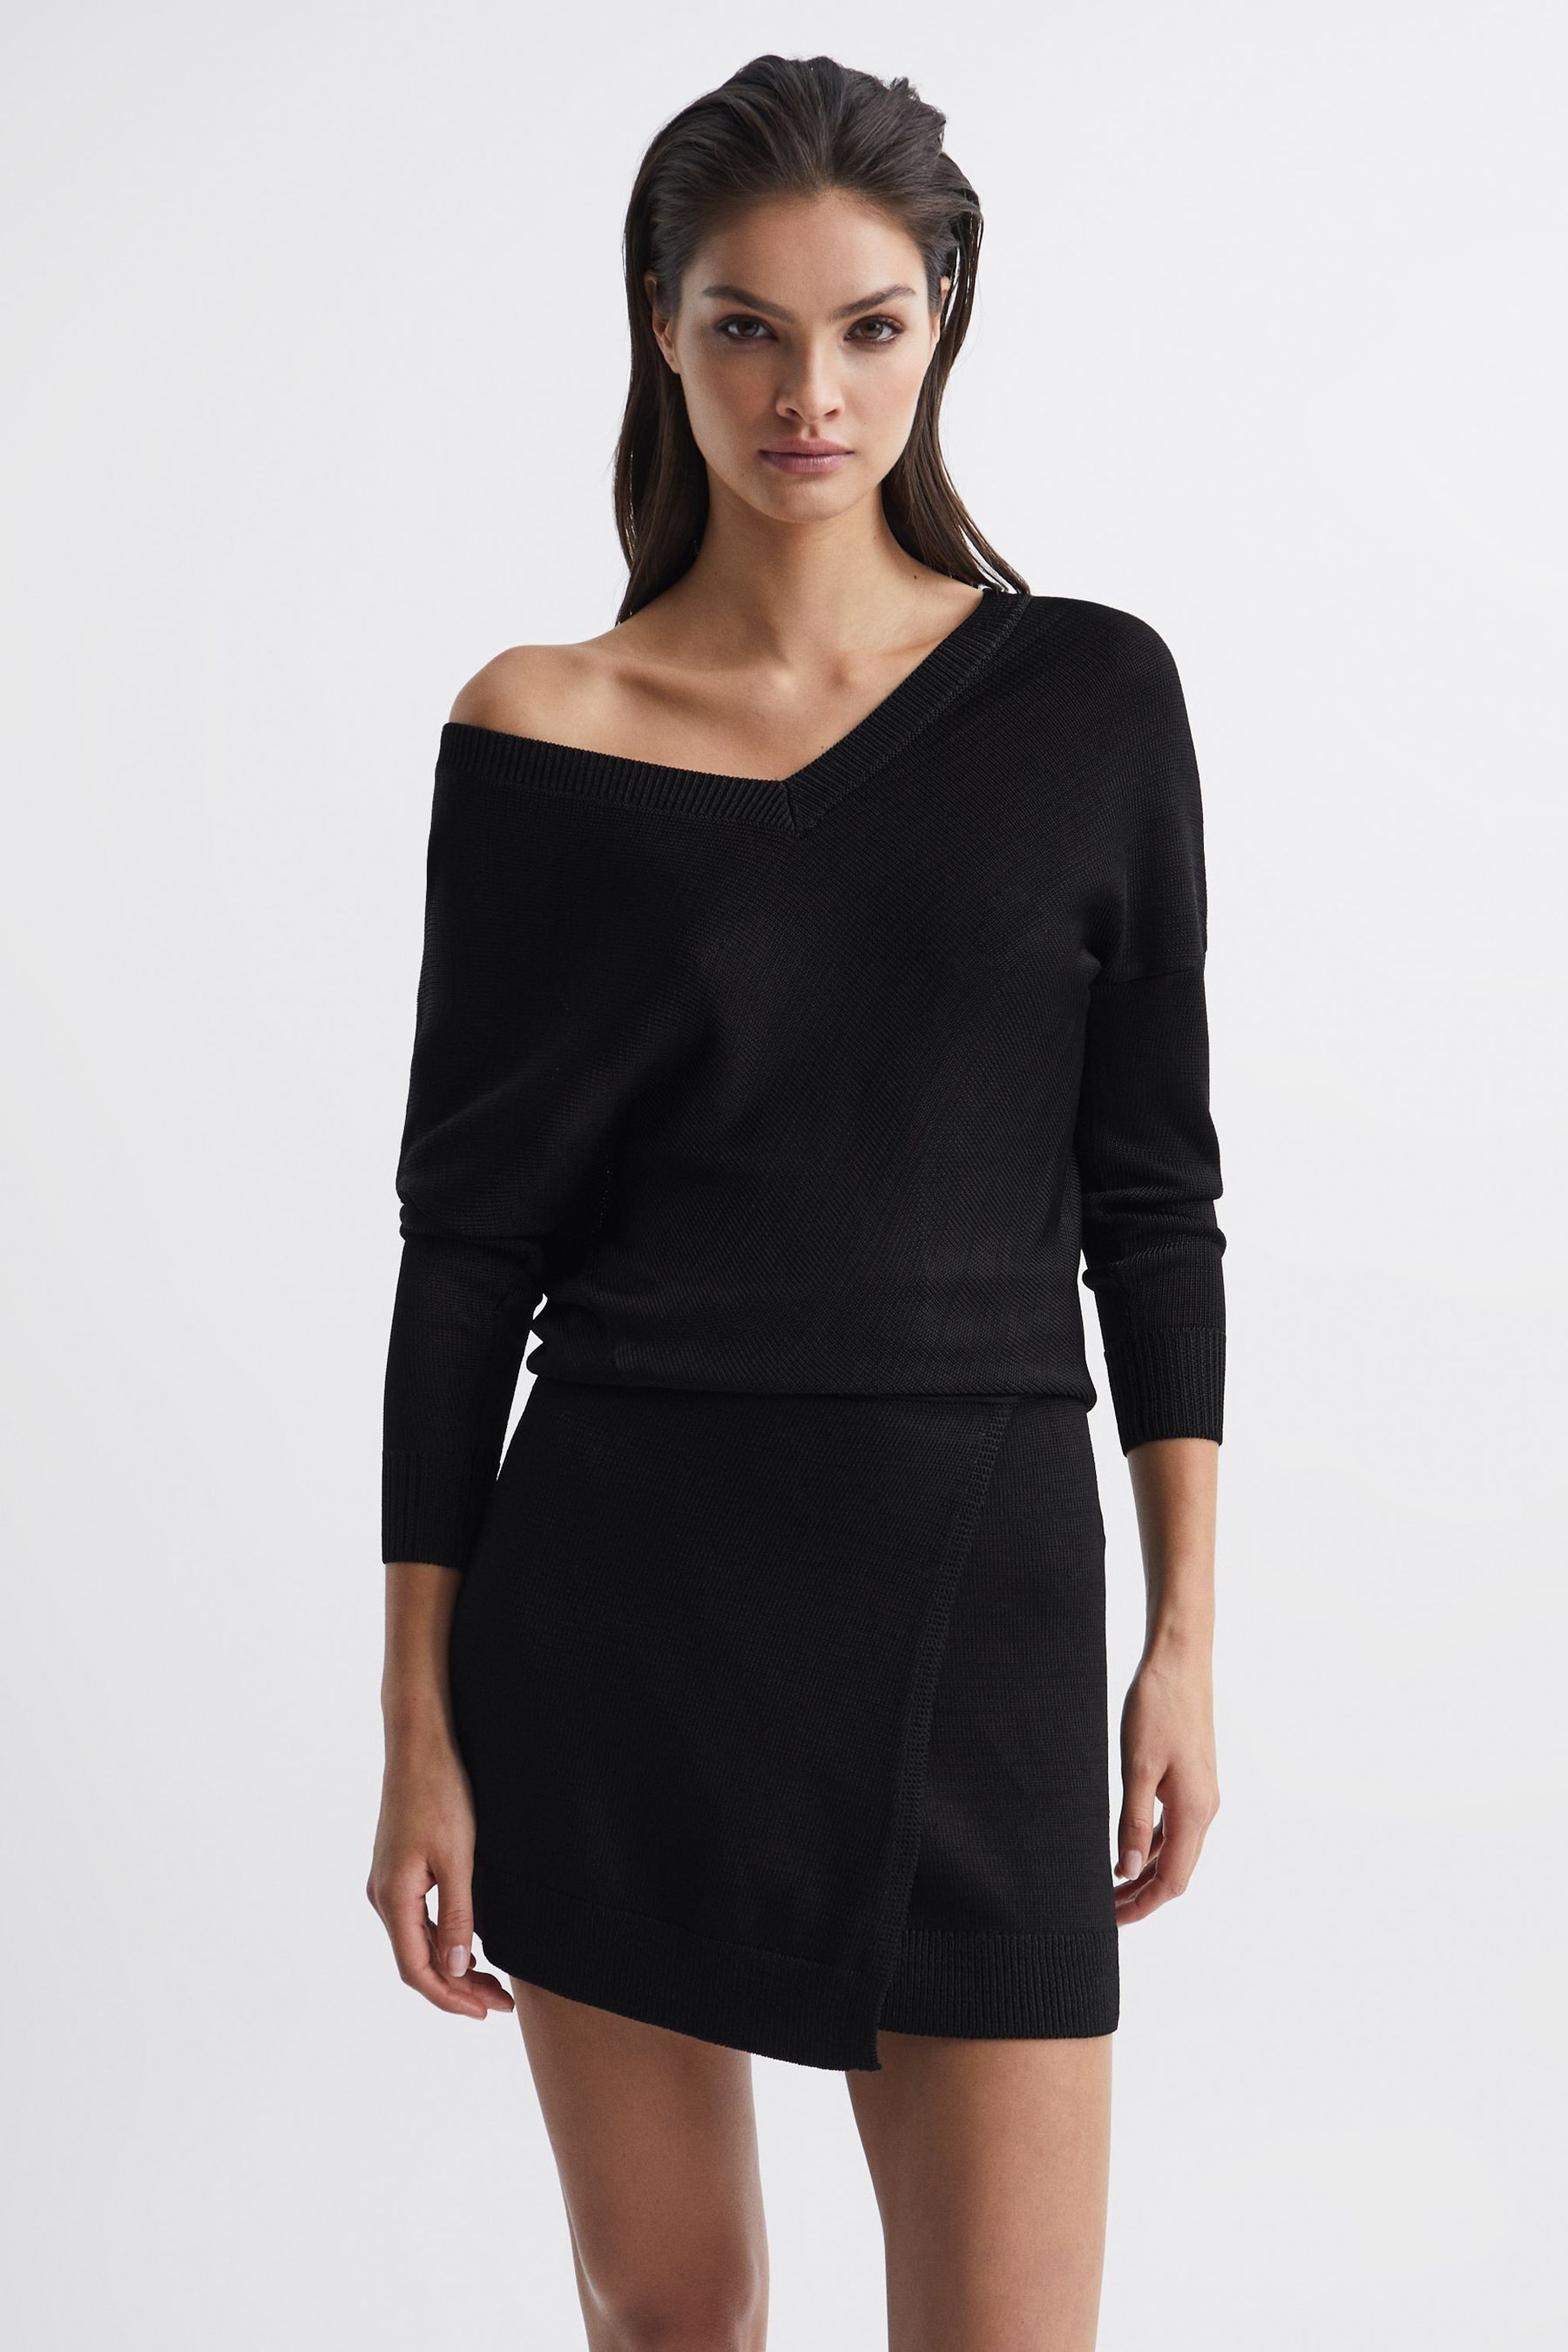 Sonia - Black Knitted Bodycon...